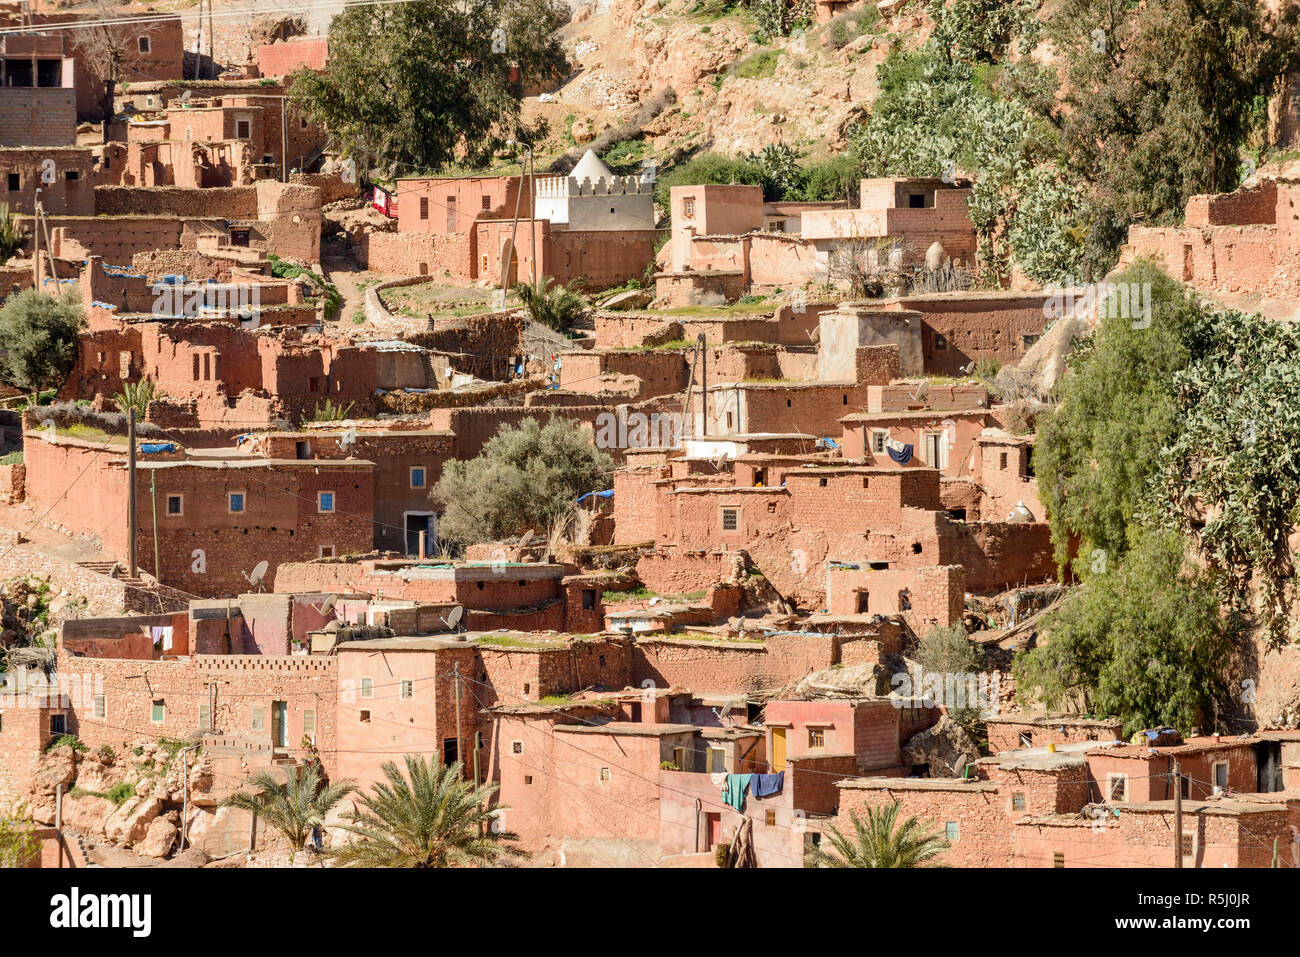 01-03-15, Marrakech, Morocco. A remote rural village in the sub-Atlas Berber region. Most of the houses are built of mud bricks. Photo: © Simon Grosse Stock Photo